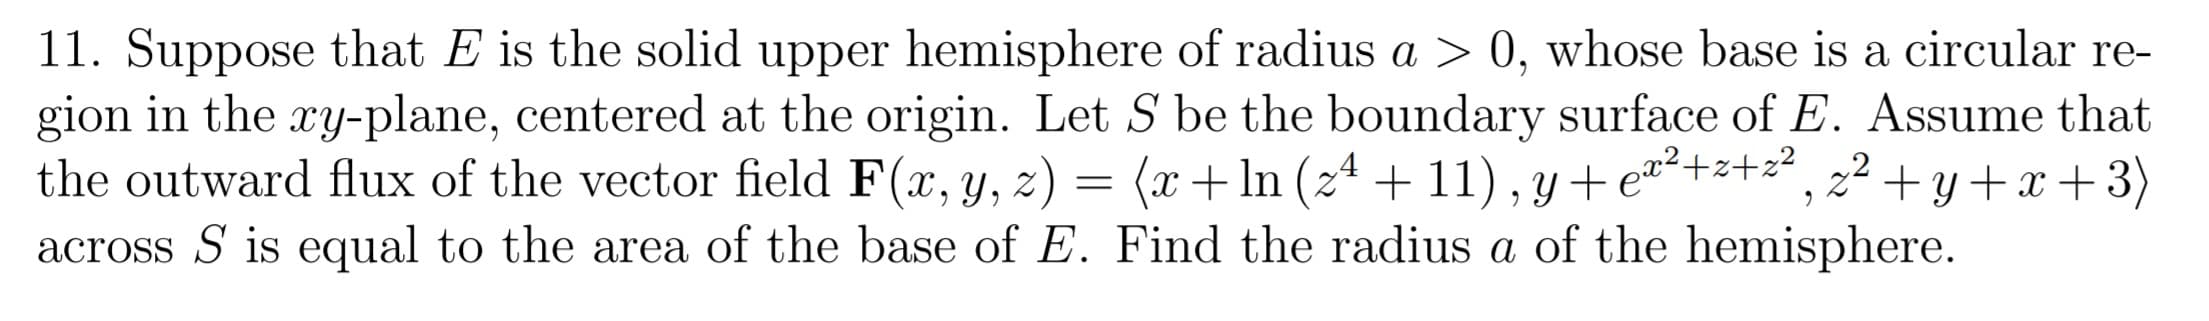 11. Suppose that E is the solid upper hemisphere of radius a > 0, whose base is a circular re-
gion in the ry-plane, centered at the origin. Let S be the boundary surface of E. Assume that
the outward flux of the vector field F(x, y, z) = (x+ ln (24 + 11), y + e™²+z+z², z² + y+x+3)
across S is equal to the area of the base of E. Find the radius a of the hemisphere.
